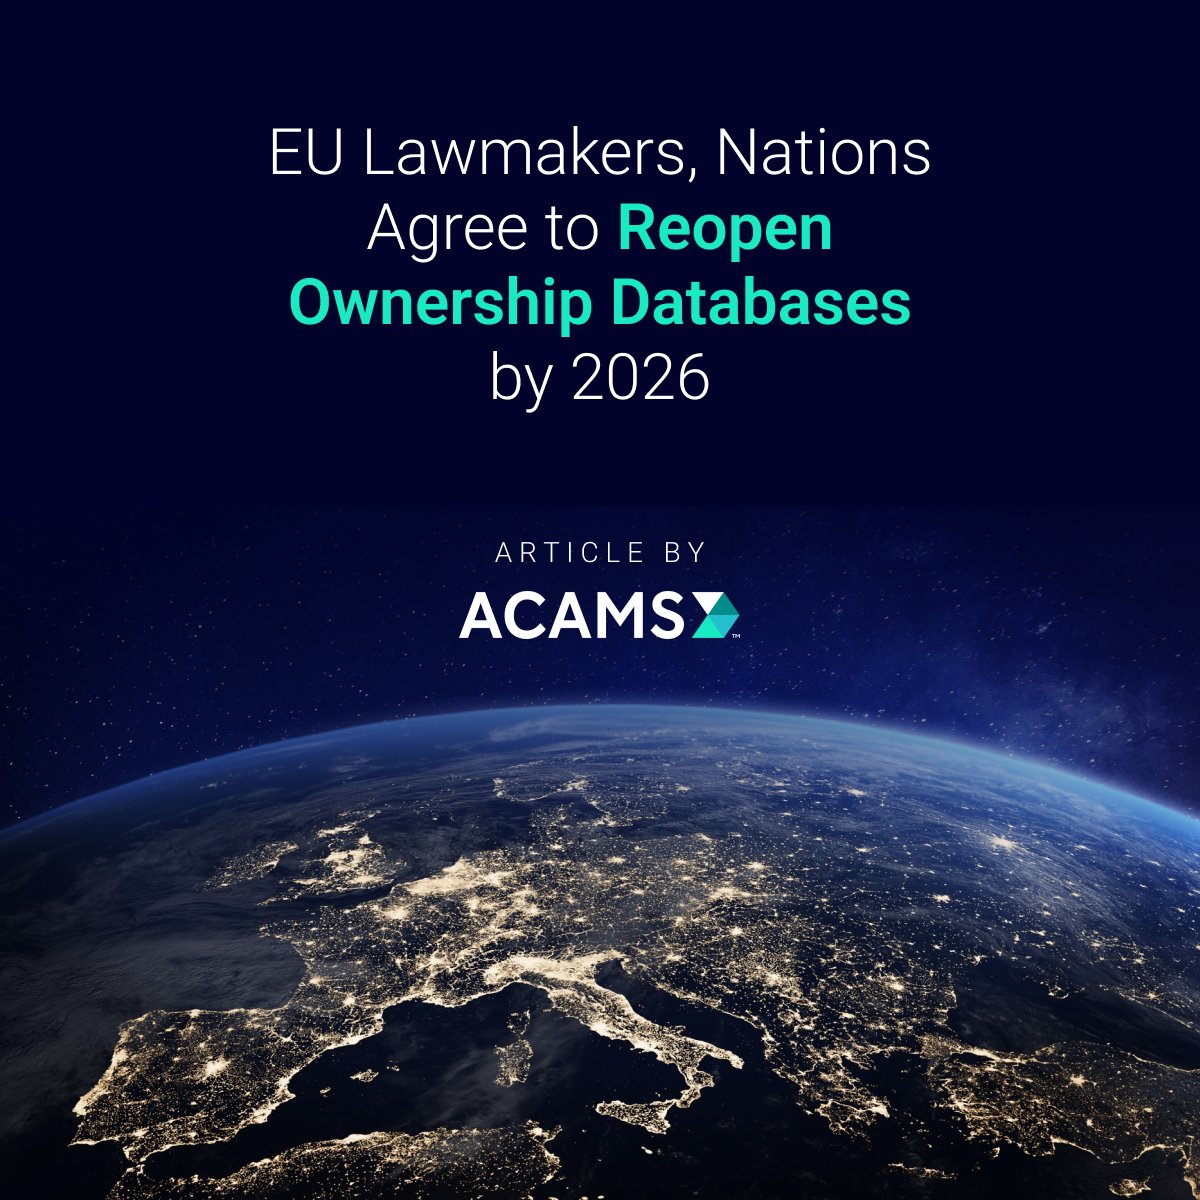 The EU is setting a new standard for #transparency by granting investigative journalists, NGOs, and those with 'legitimate interest' broad access to the beneficial ownership details across all 27 national registers by 2026. Full article by @ACAMS_AML 👉 moneylaundering.com/news/eu-offici…